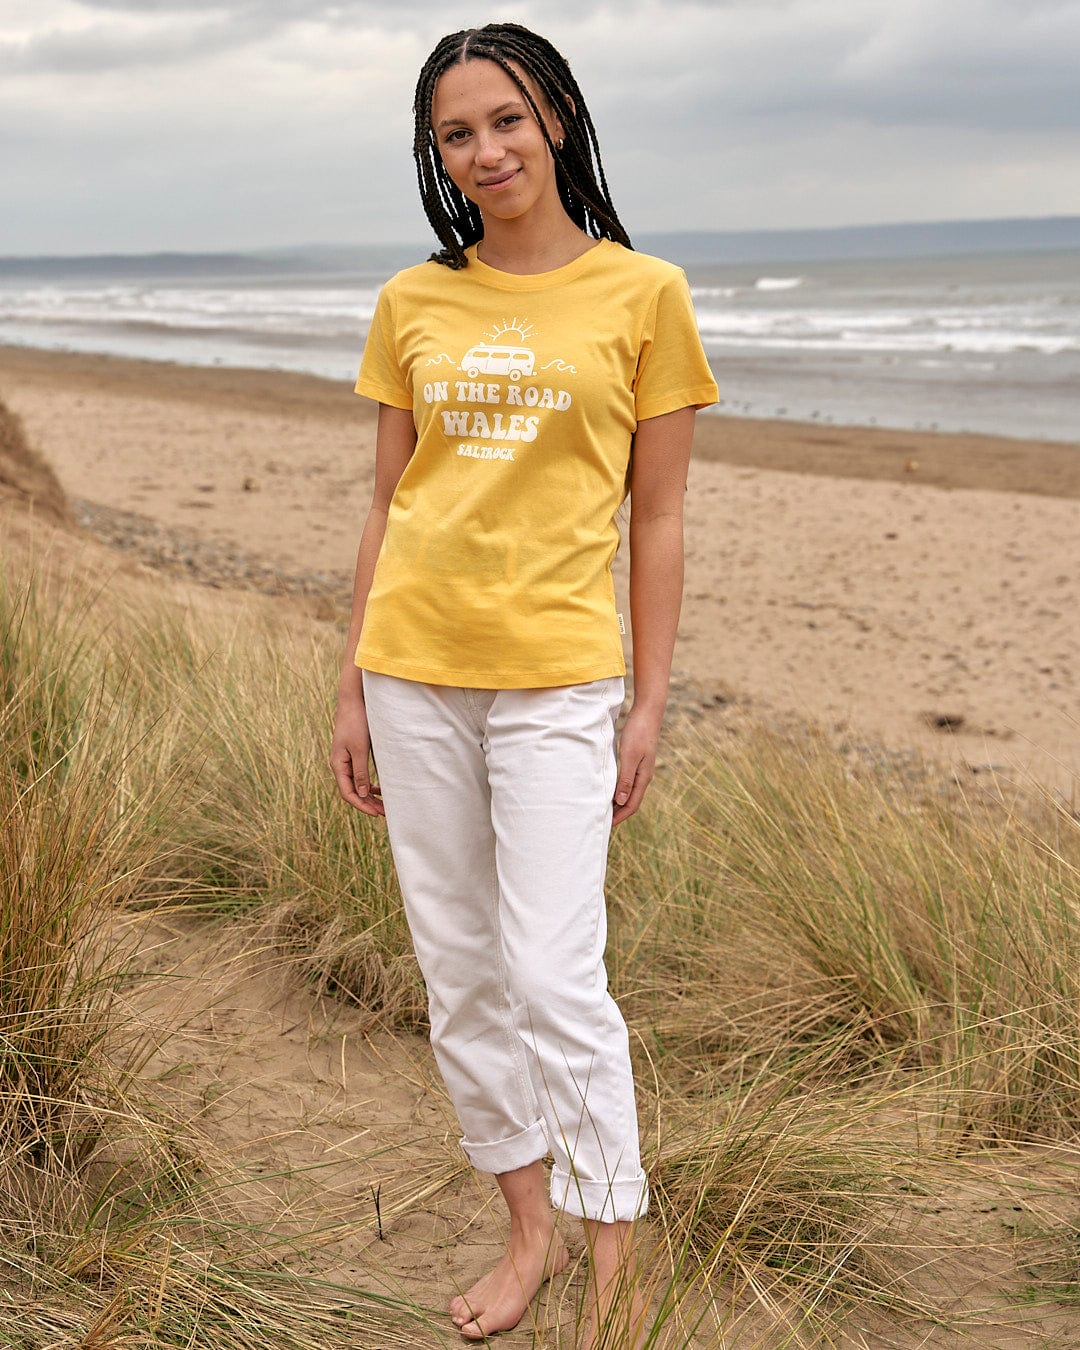 A woman wearing a Saltrock On The Road Wales - Womens Short Sleeve T-Shirt - Yellow standing on the beach.